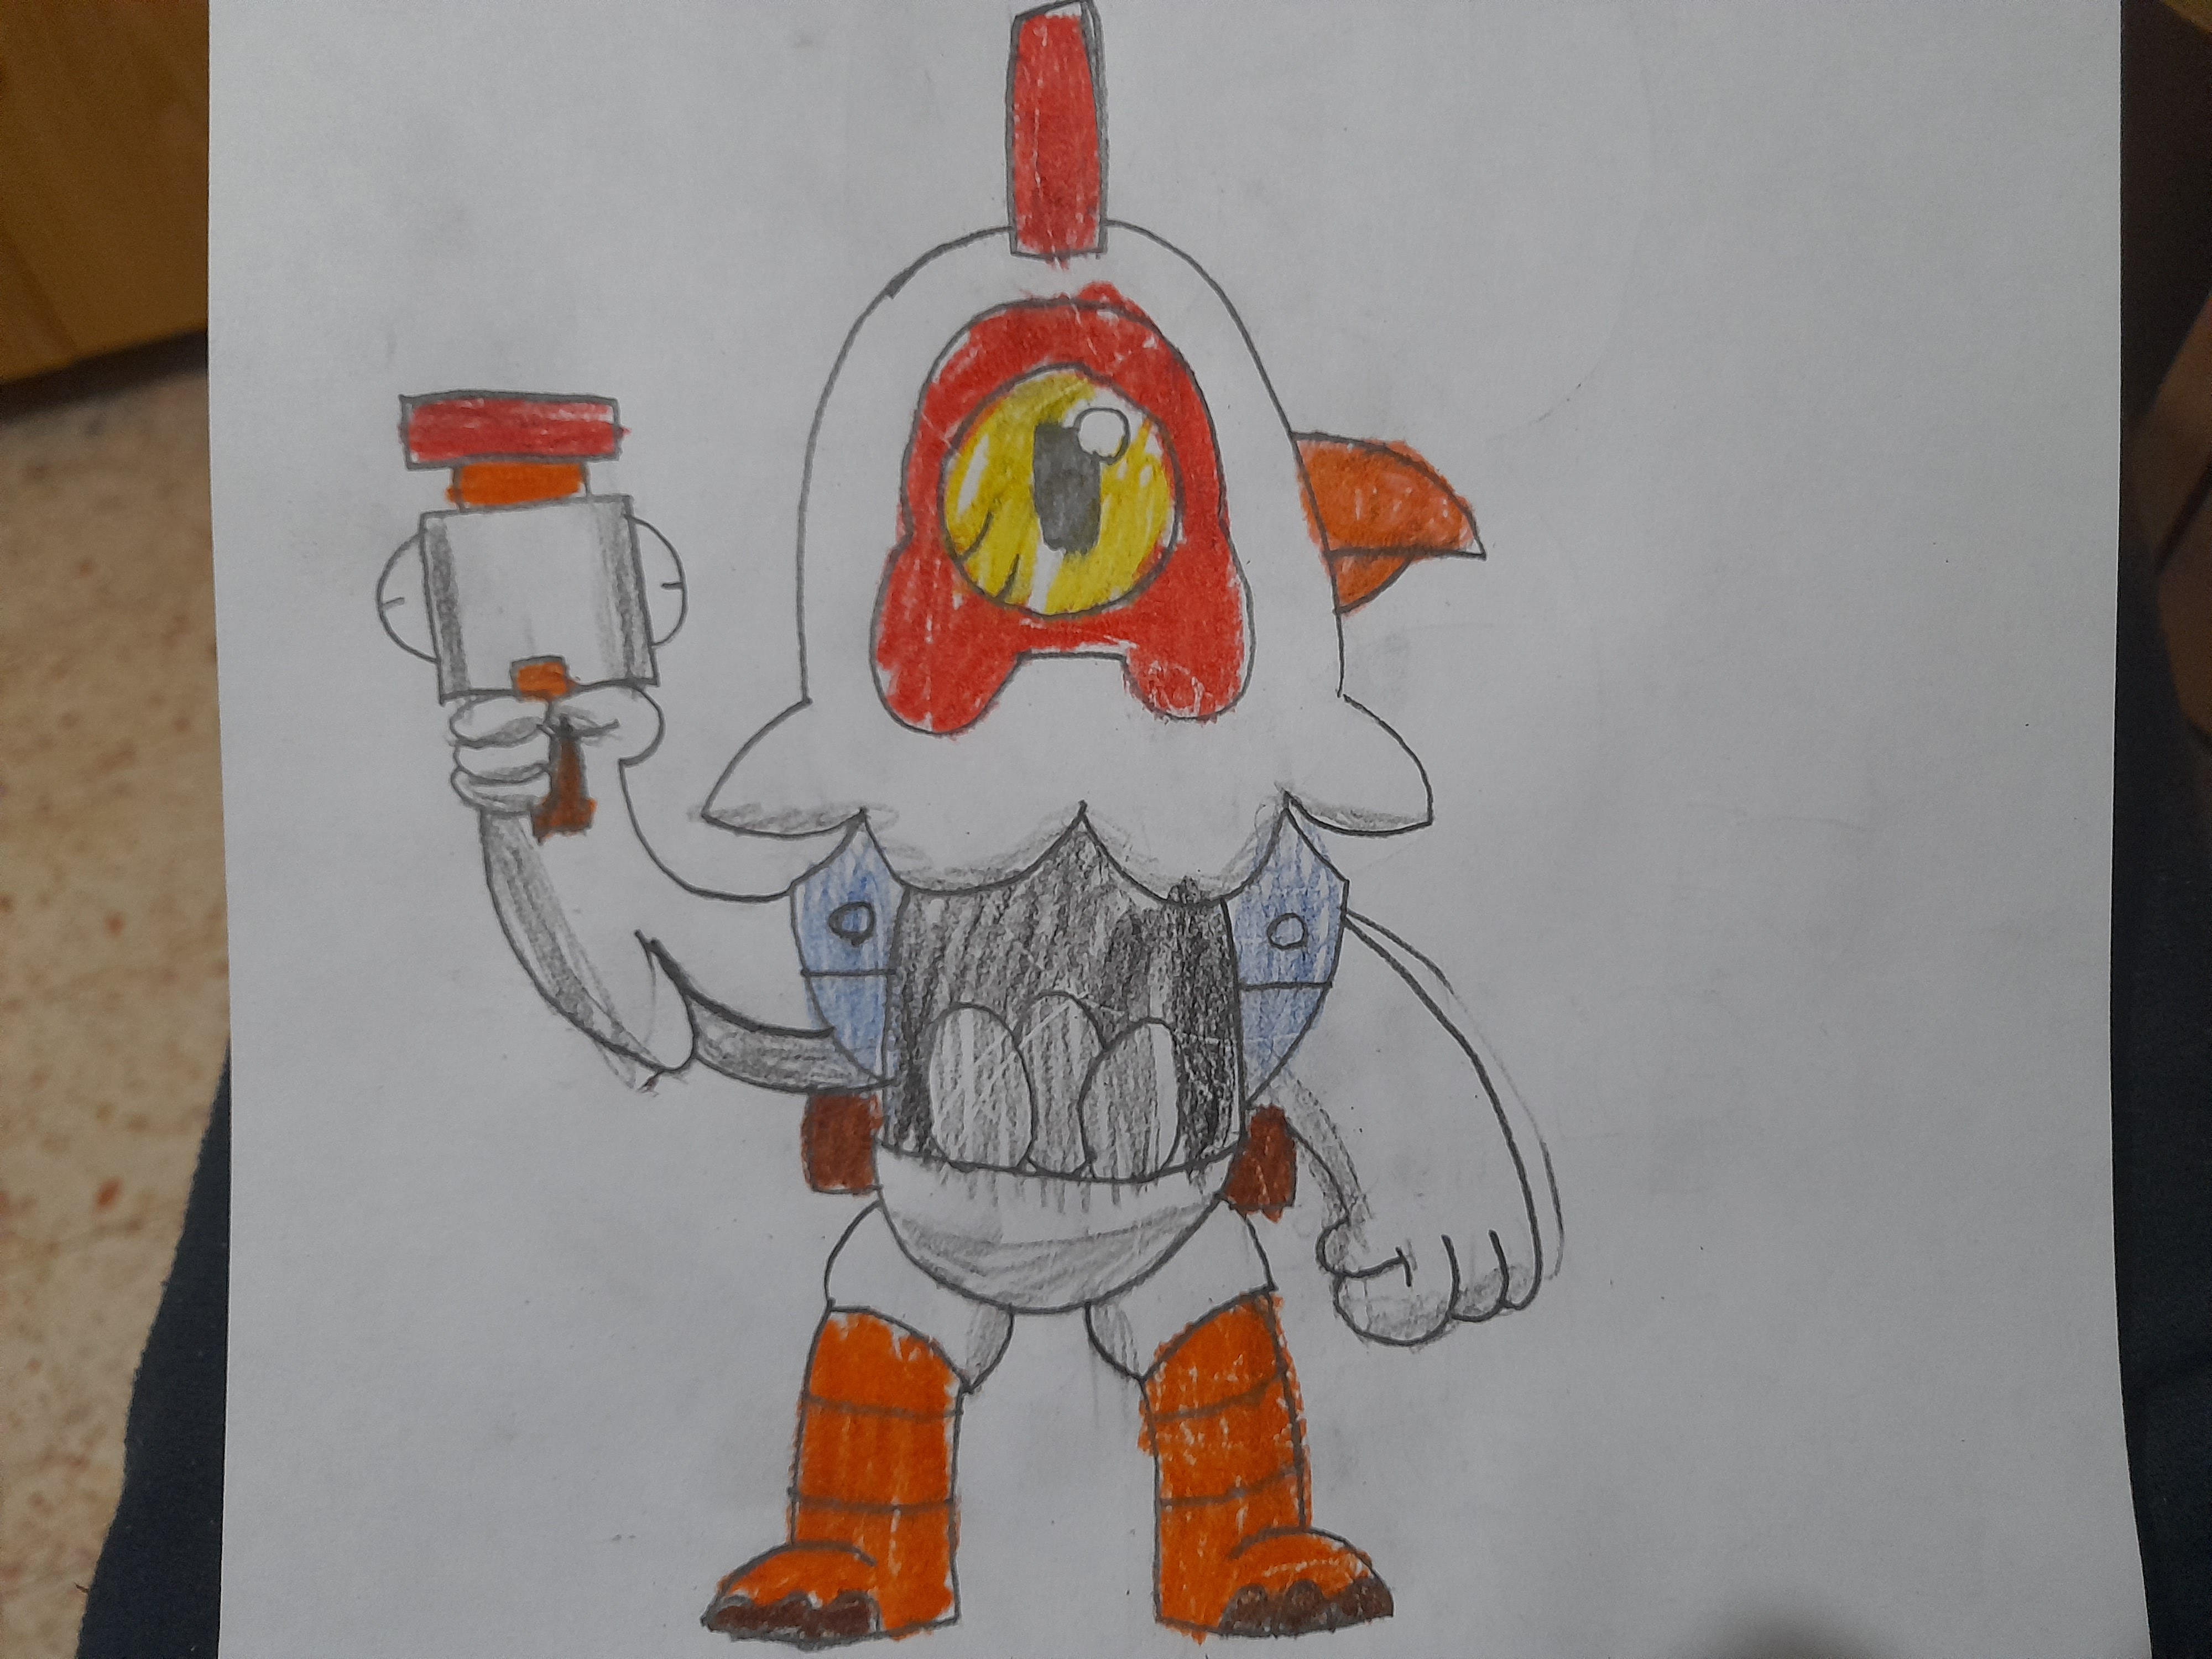 My drawing of Chicken Rico